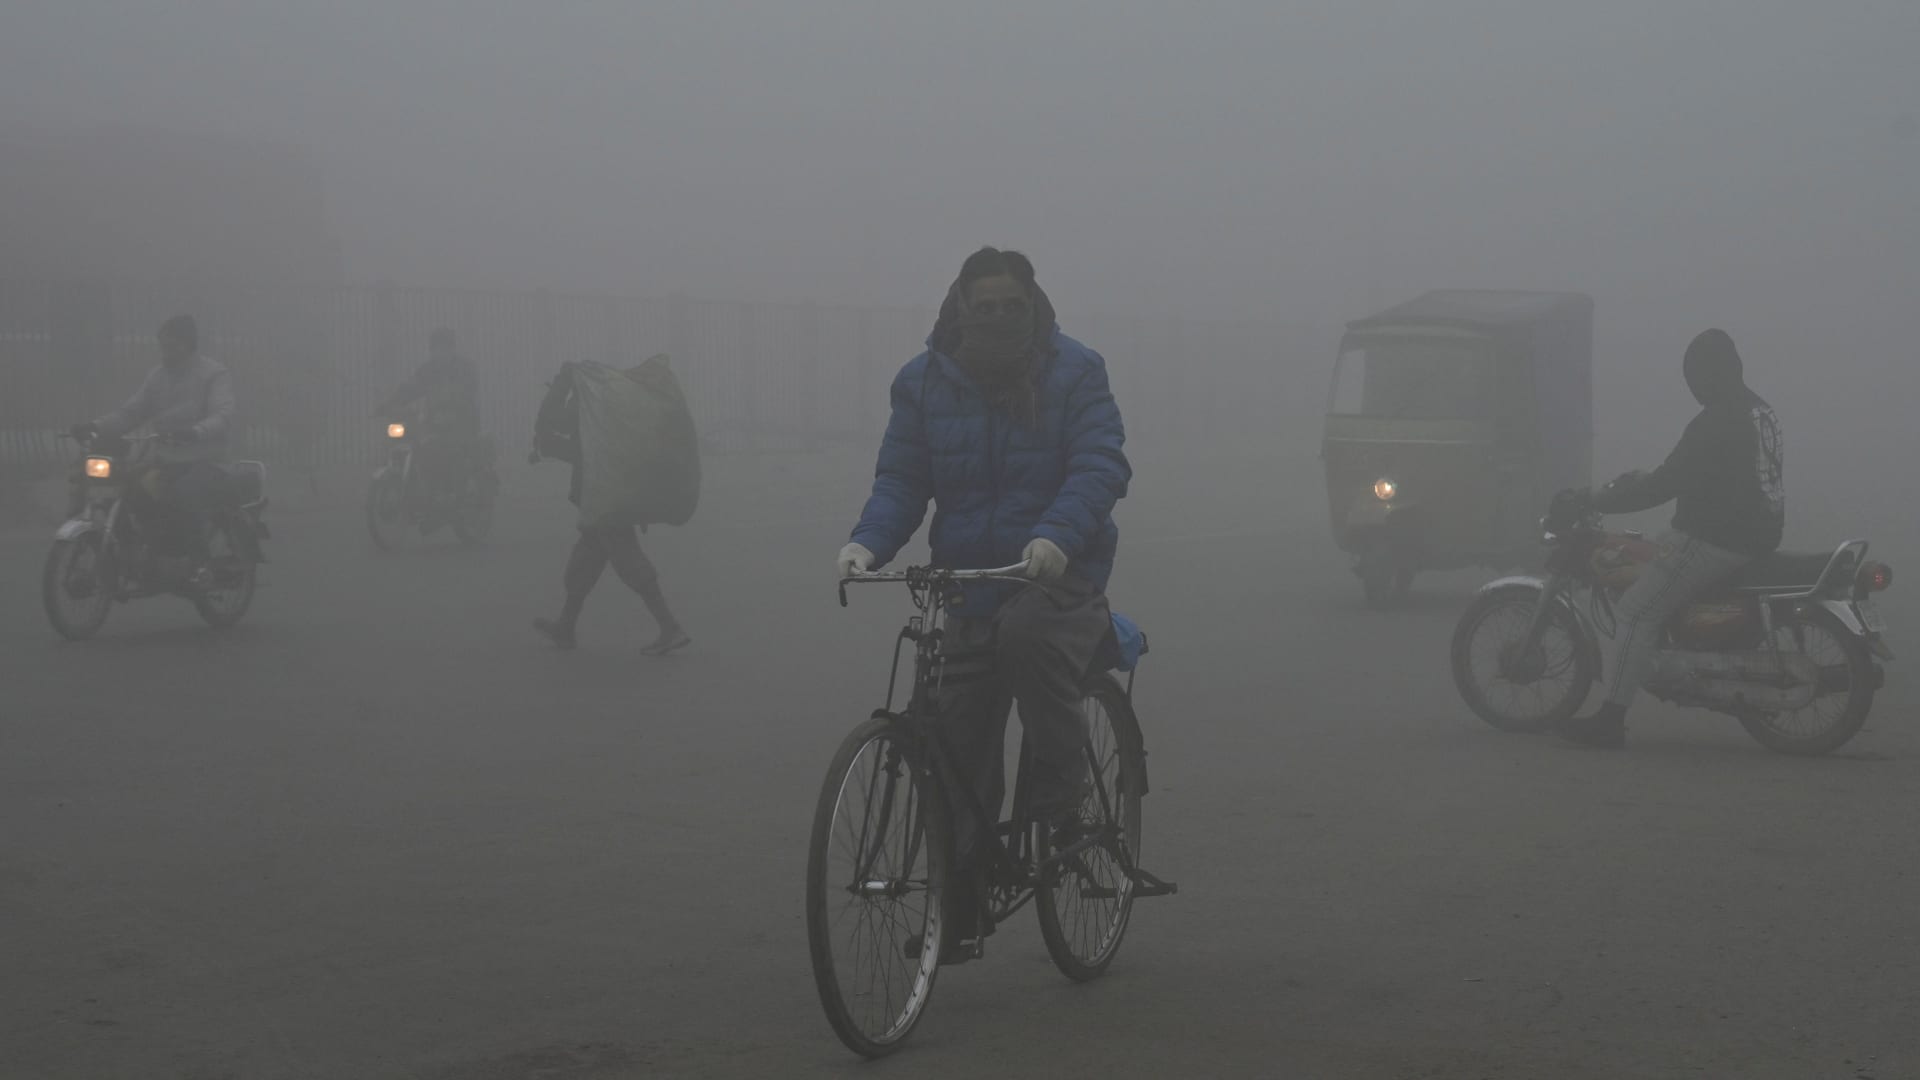 Below are the most polluted cities and nations around the world in the planet